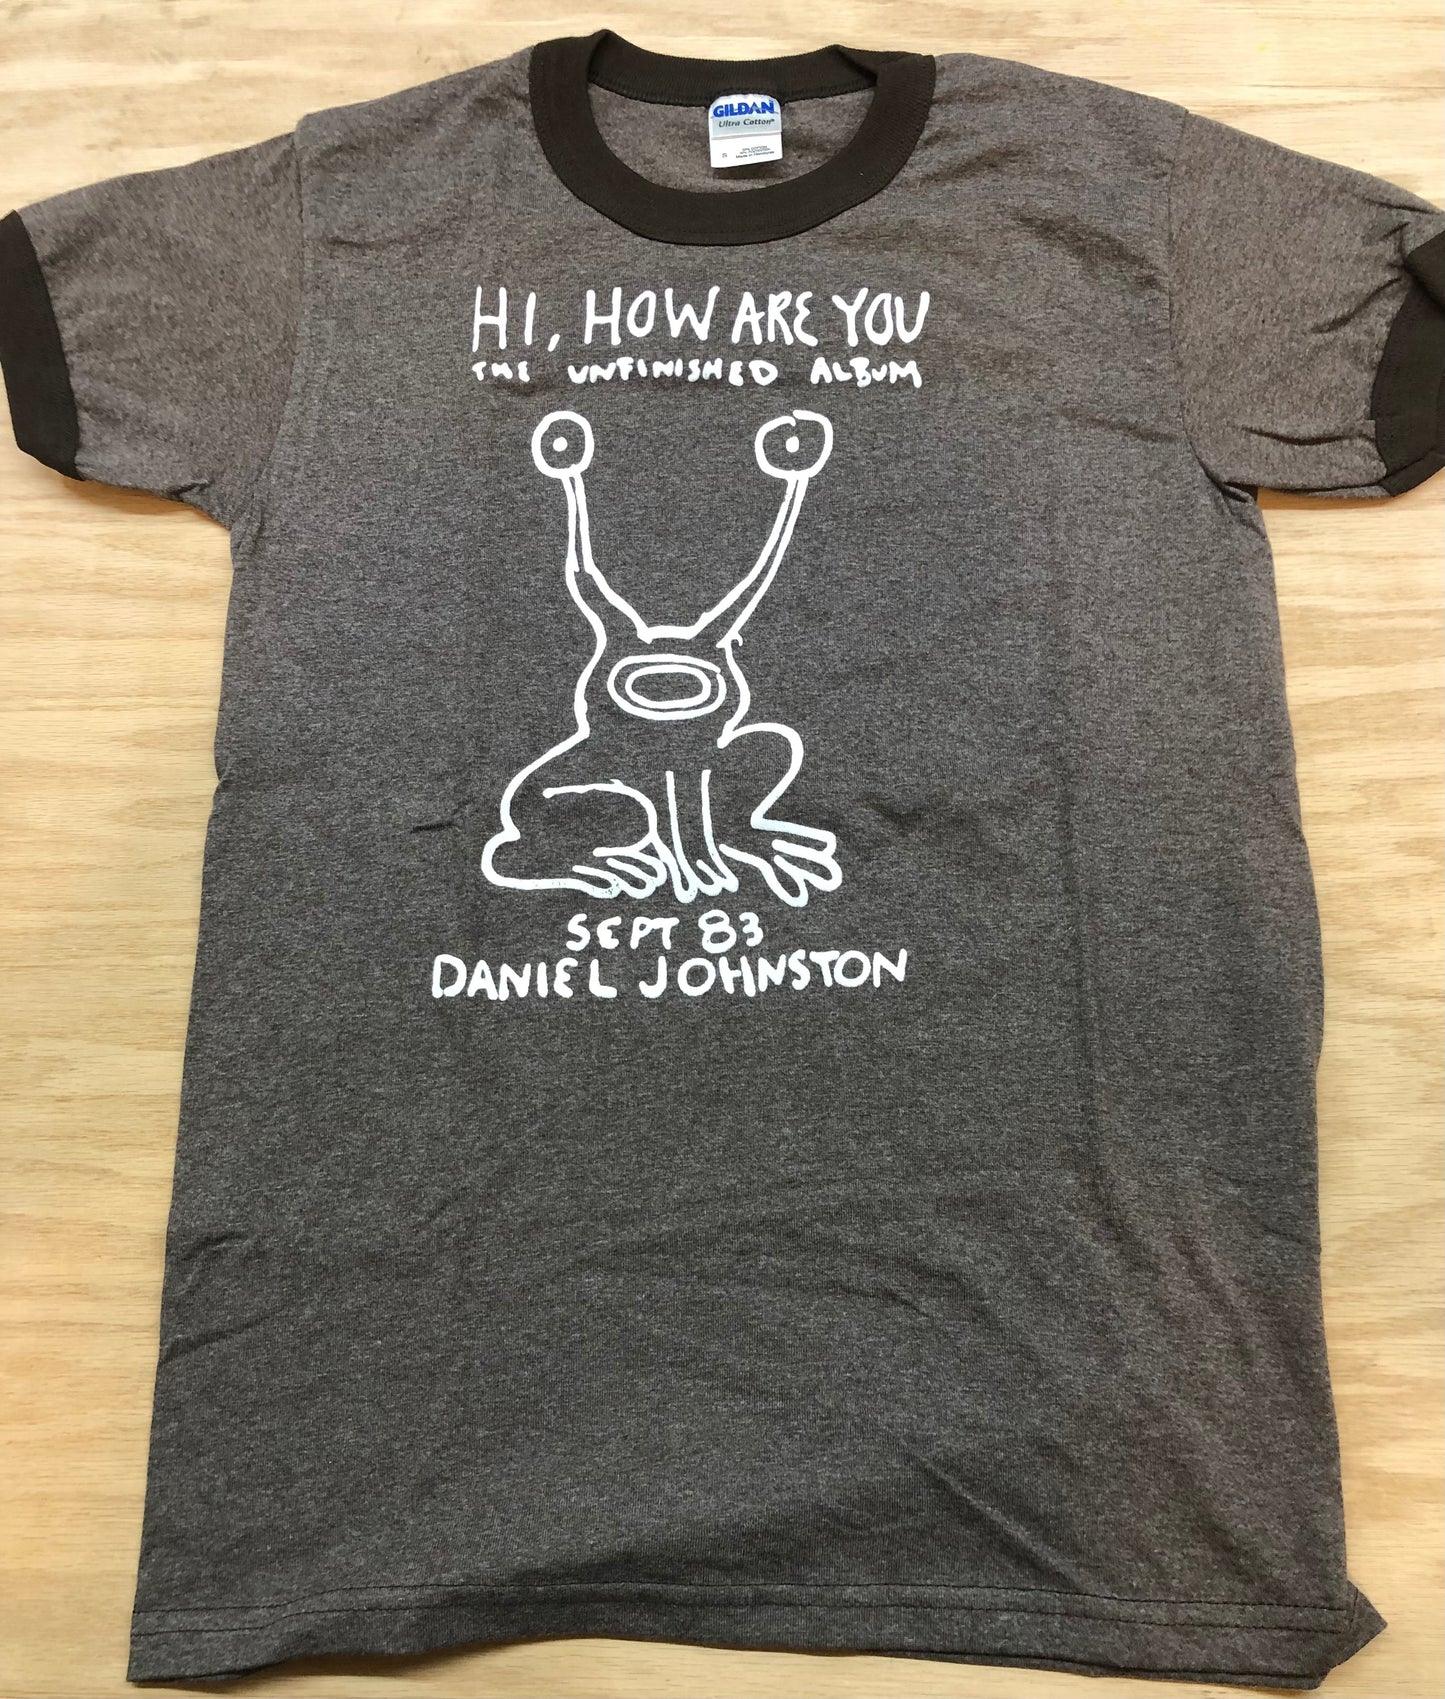 "Hi, How Are You" Brown T-Shirt